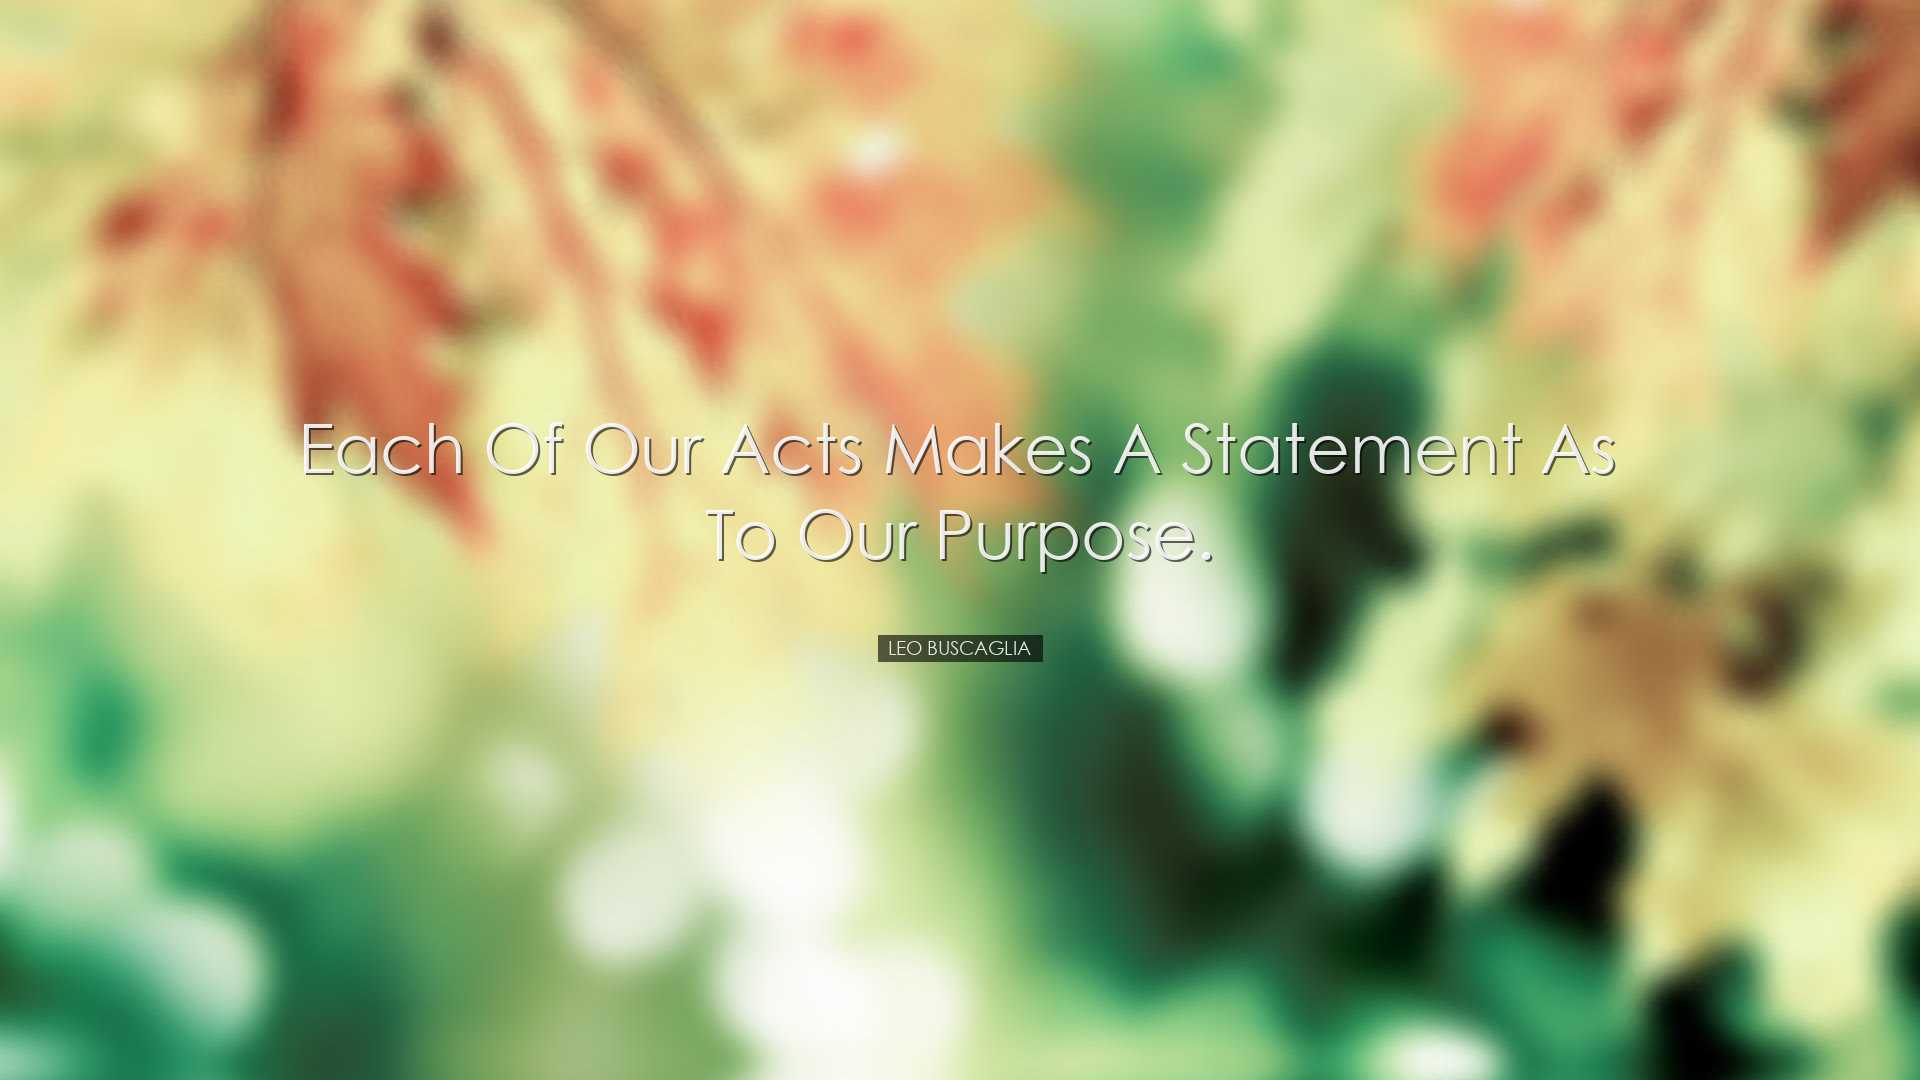 Each of our acts makes a statement as to our purpose. - Leo Buscag